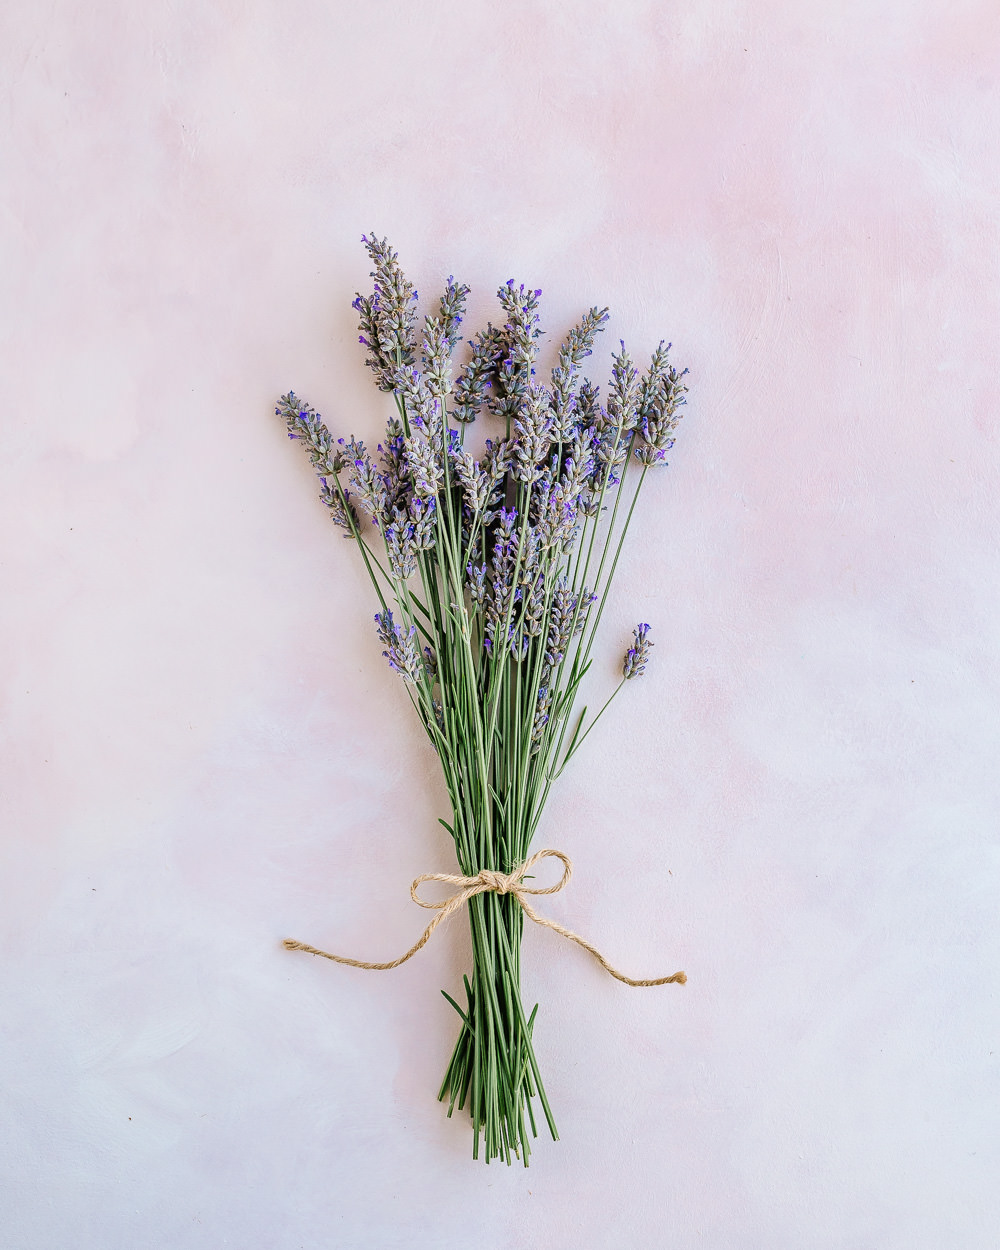 How to Dry Lavender